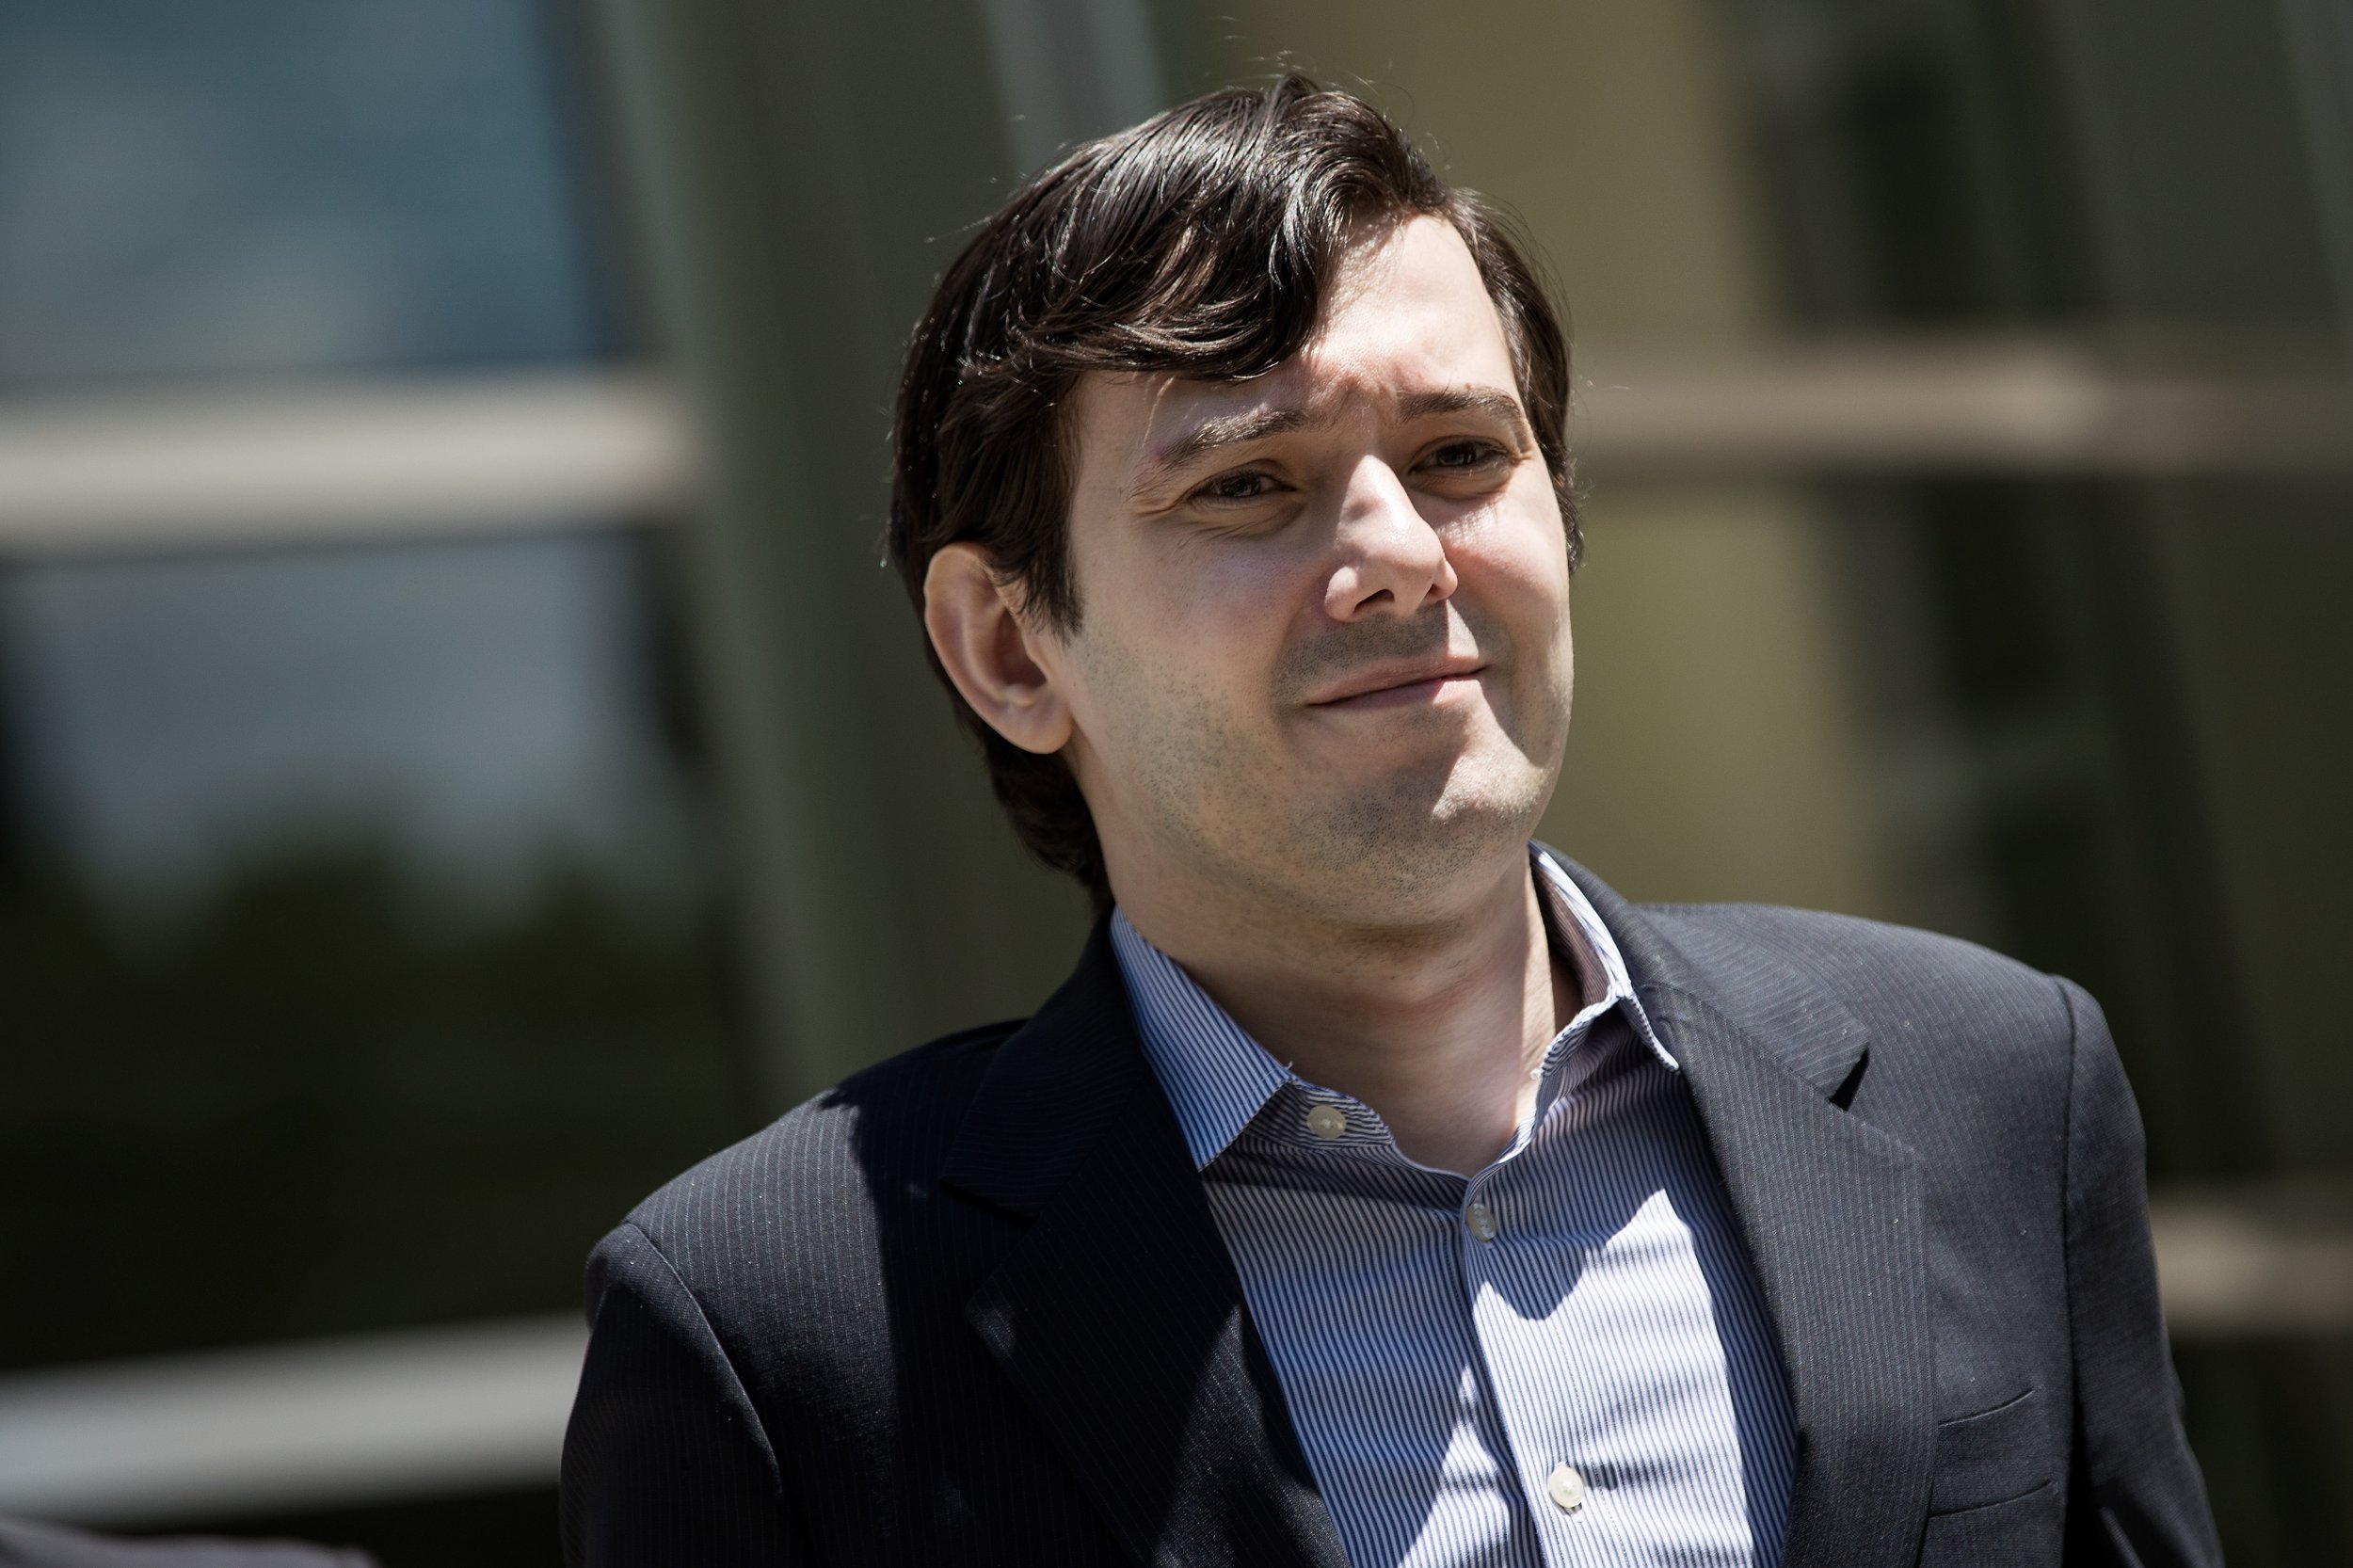 Martin Shkreli Net Worth How Rich Is Notorious ‘Pharma Bro’ Before Trial?